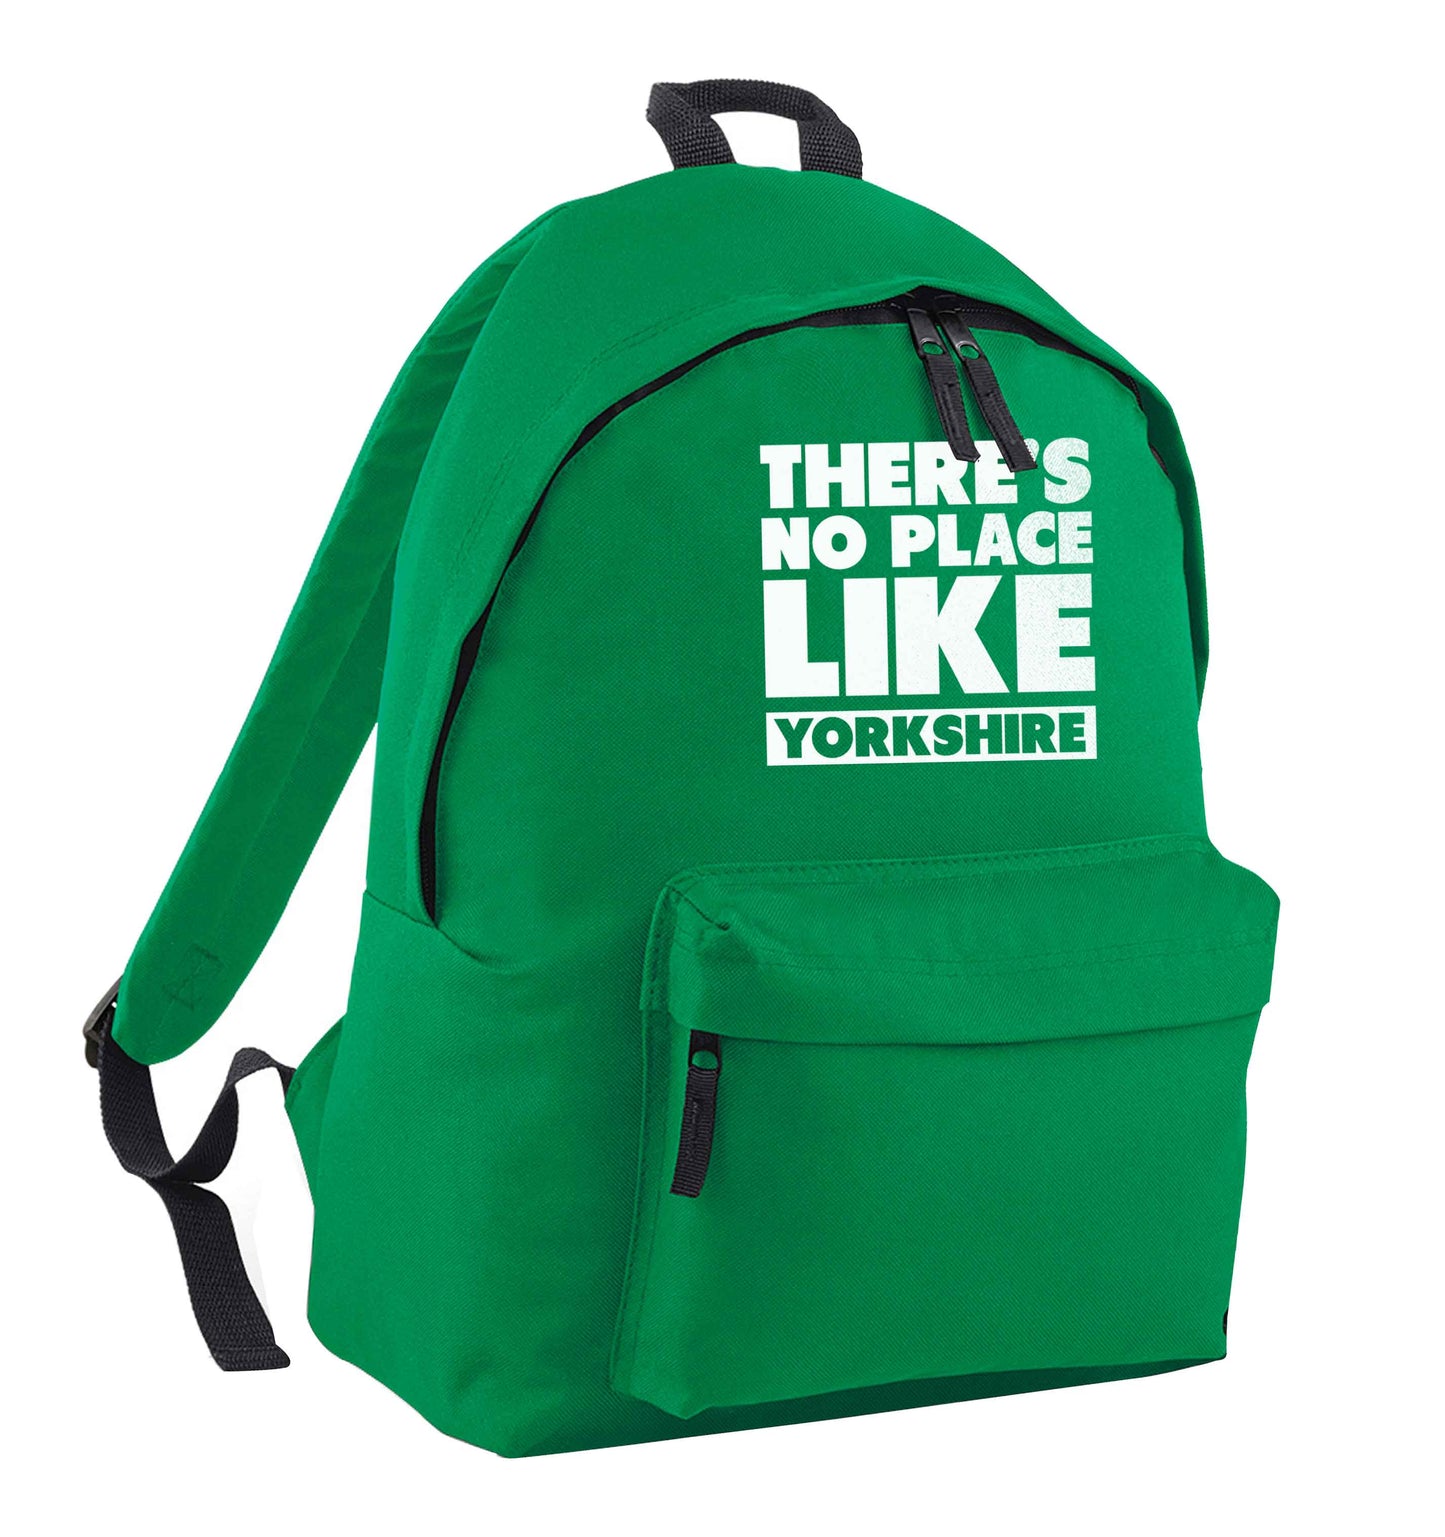 There's no place like Yorkshire green adults backpack